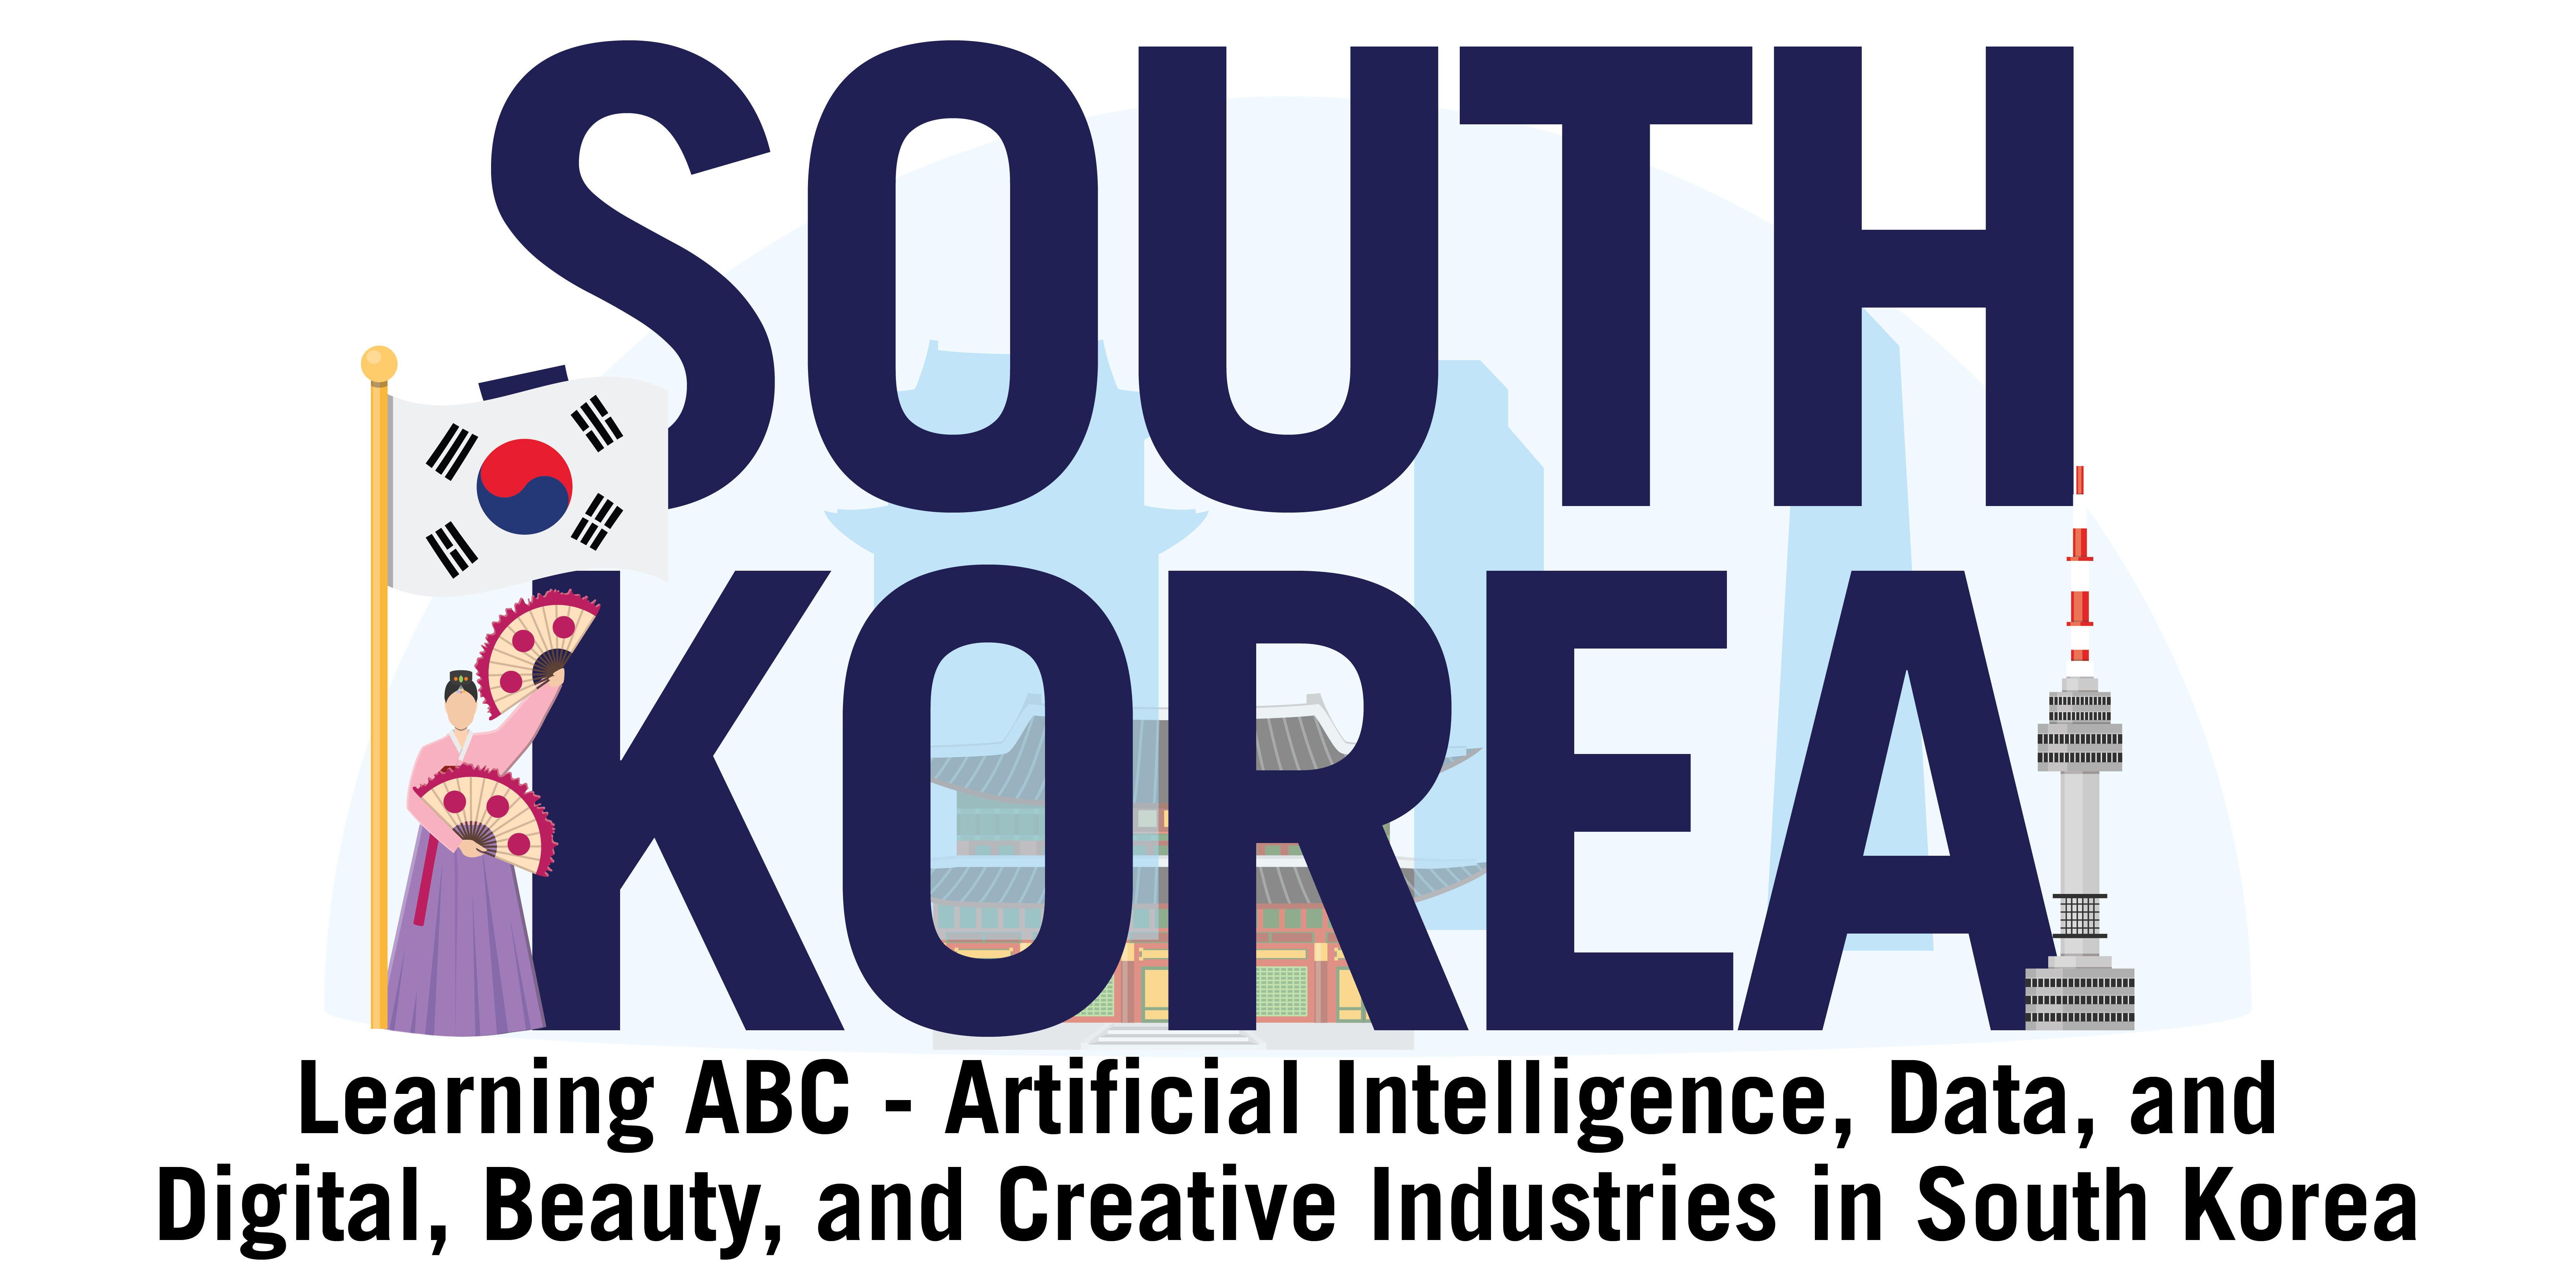 Learning ABC - Artificial Intelligence, Data, and Digital, Beauty, and Creative Industries in South Korea